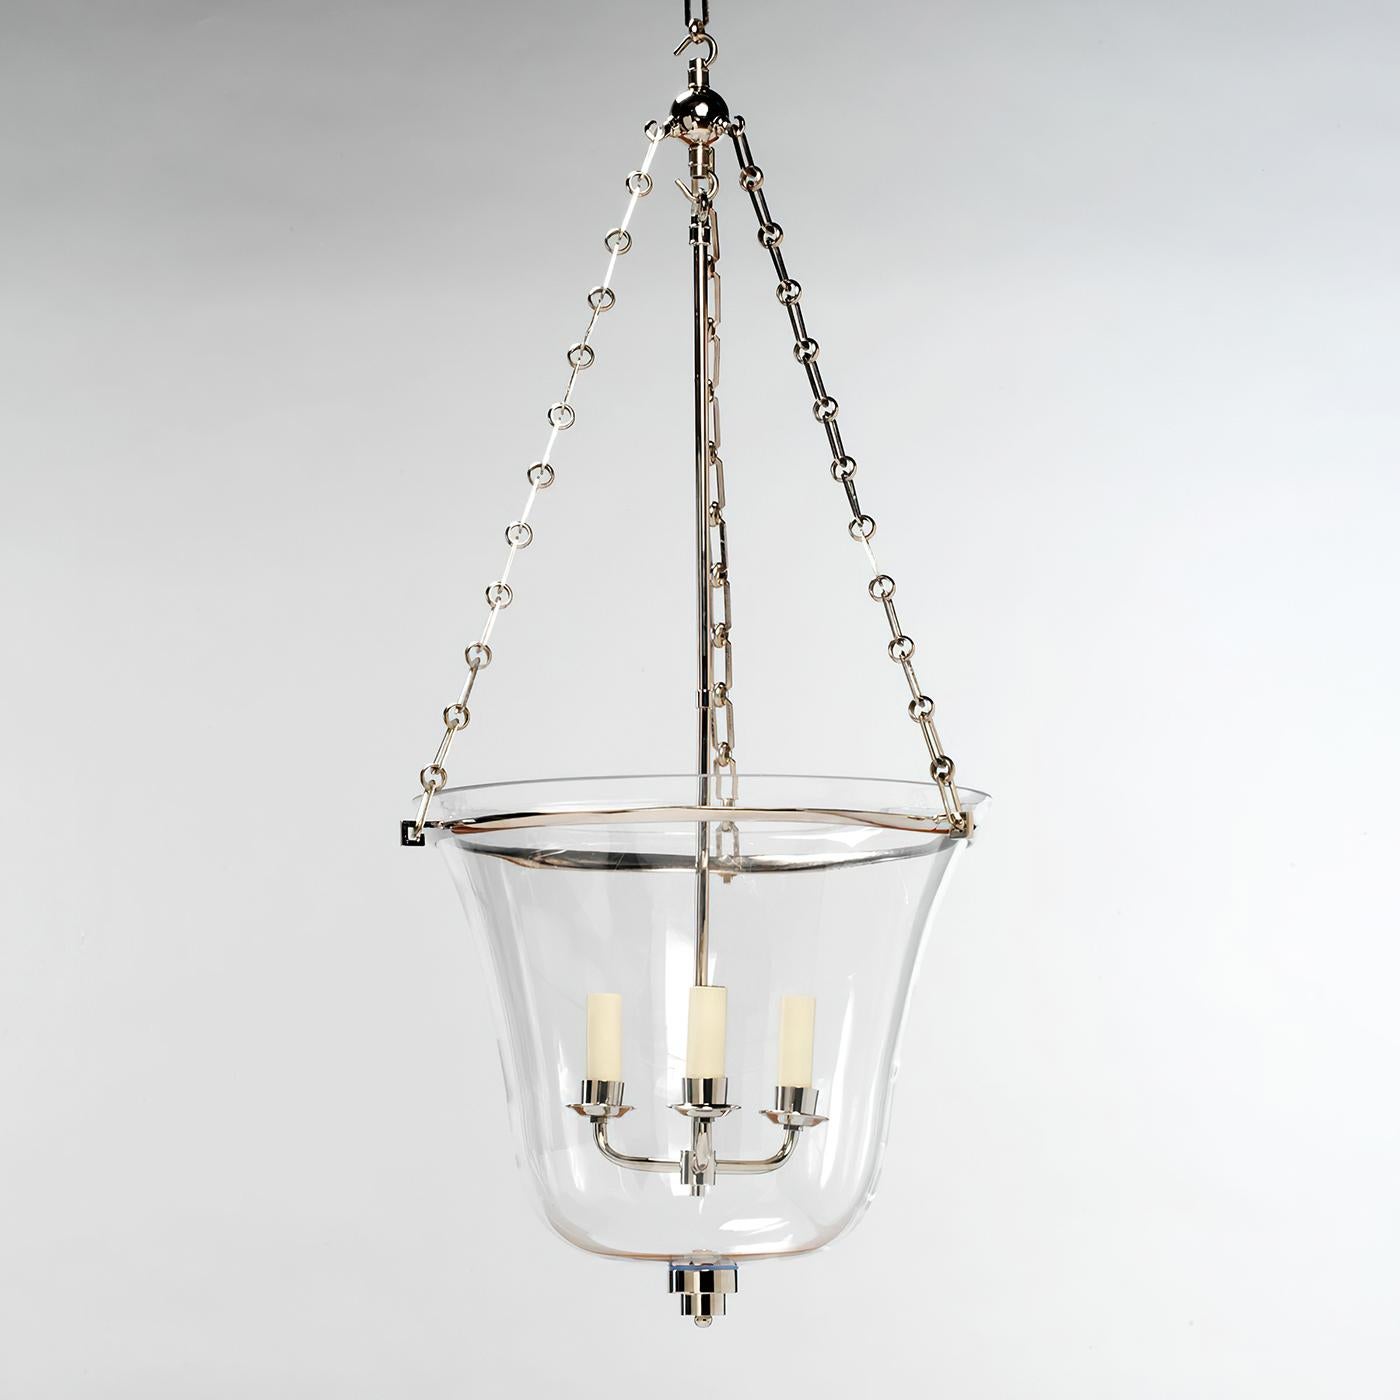 This design features a graceful hand-blown glass bell. The glass is paired with a sleek nickel-plated cast brass circular band and Art Deco style finial. The lantern has a solid cast brass frame and decorative components which are then nickel